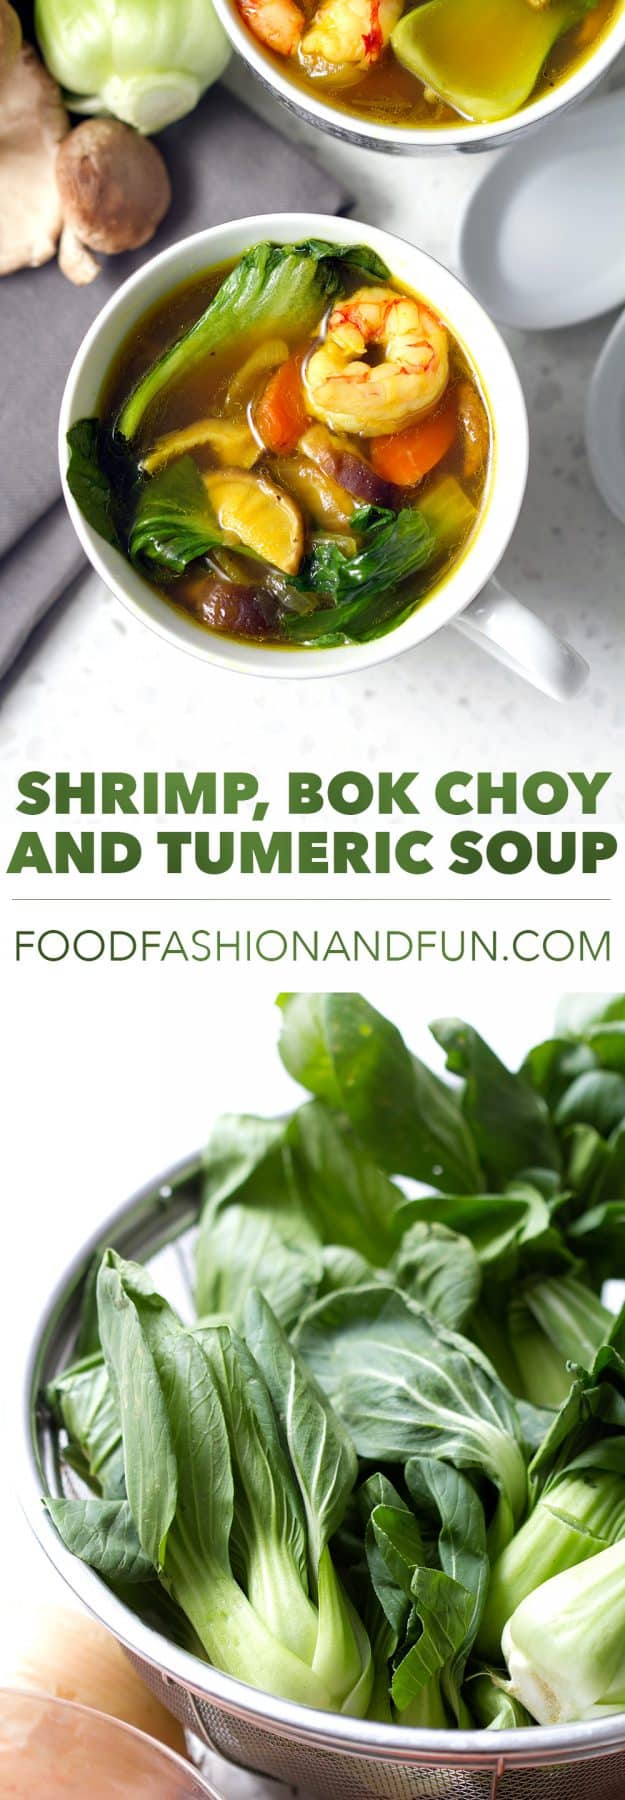 Packed full of delicious and healthy ingredients like turmeric, bok choy and shrimp for a healthy gluten free soup recipe.